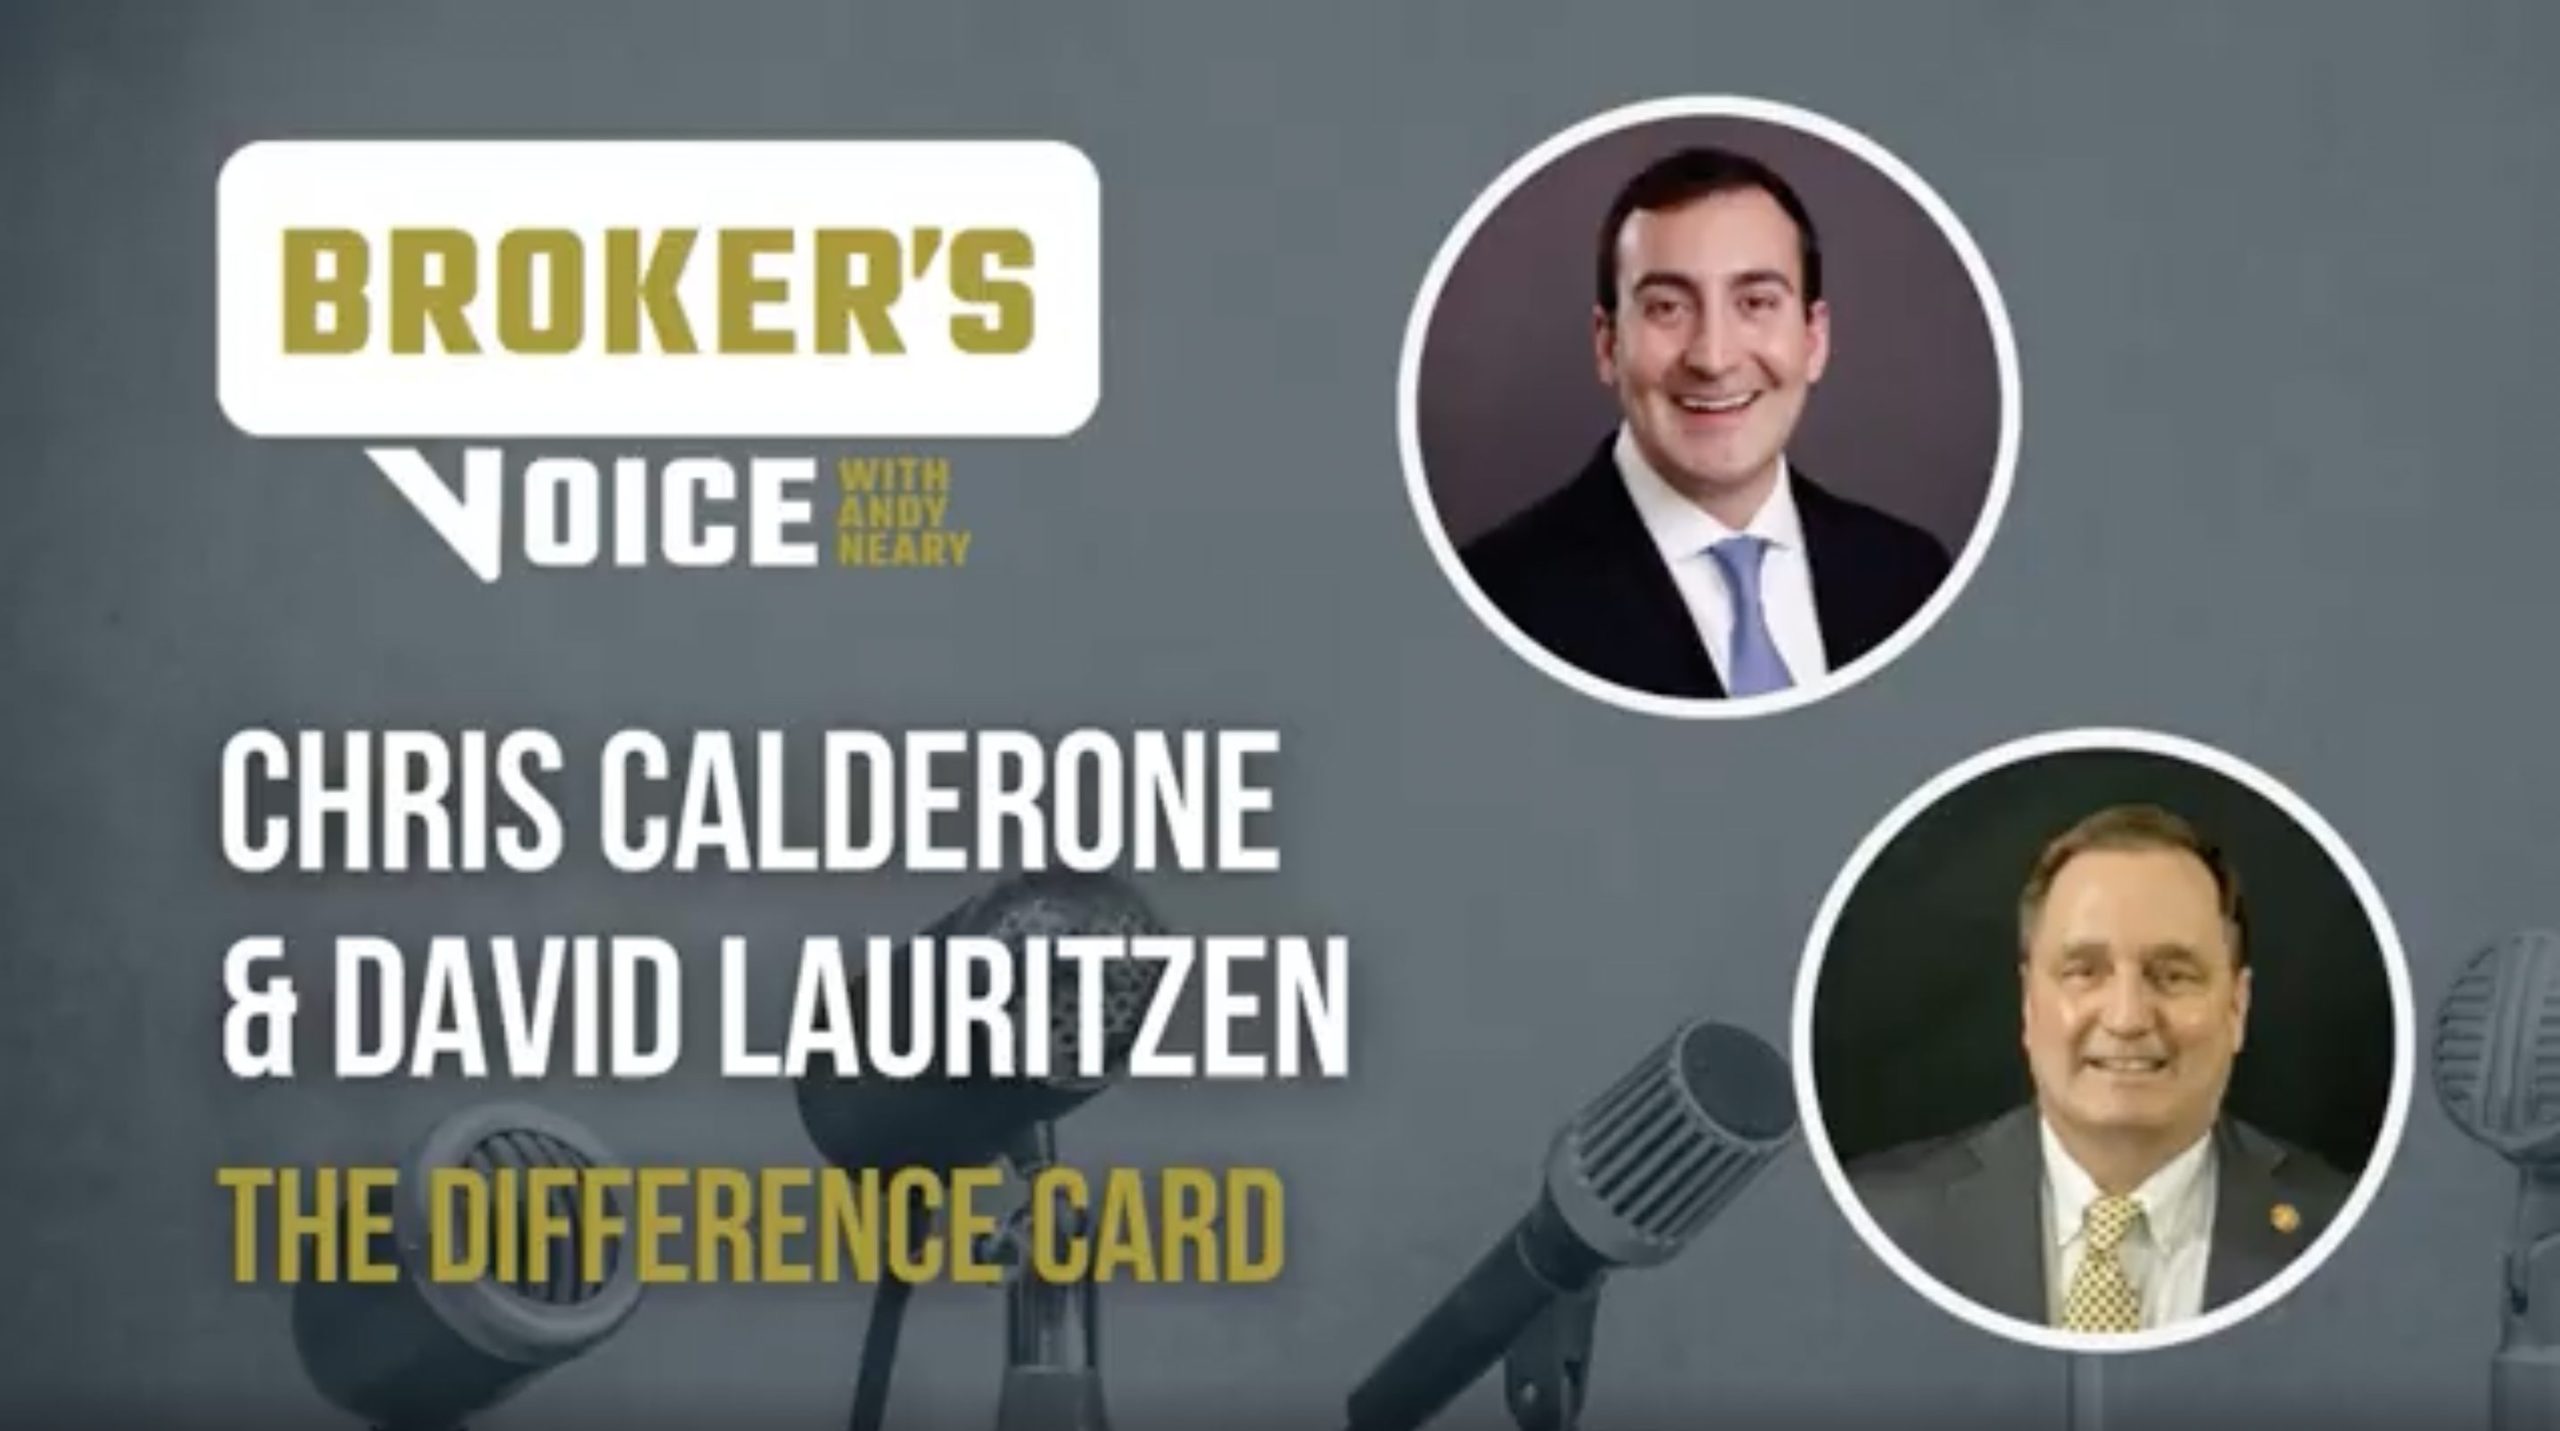 Broker's voice promo featuring Chris Calderone of The Difference Card